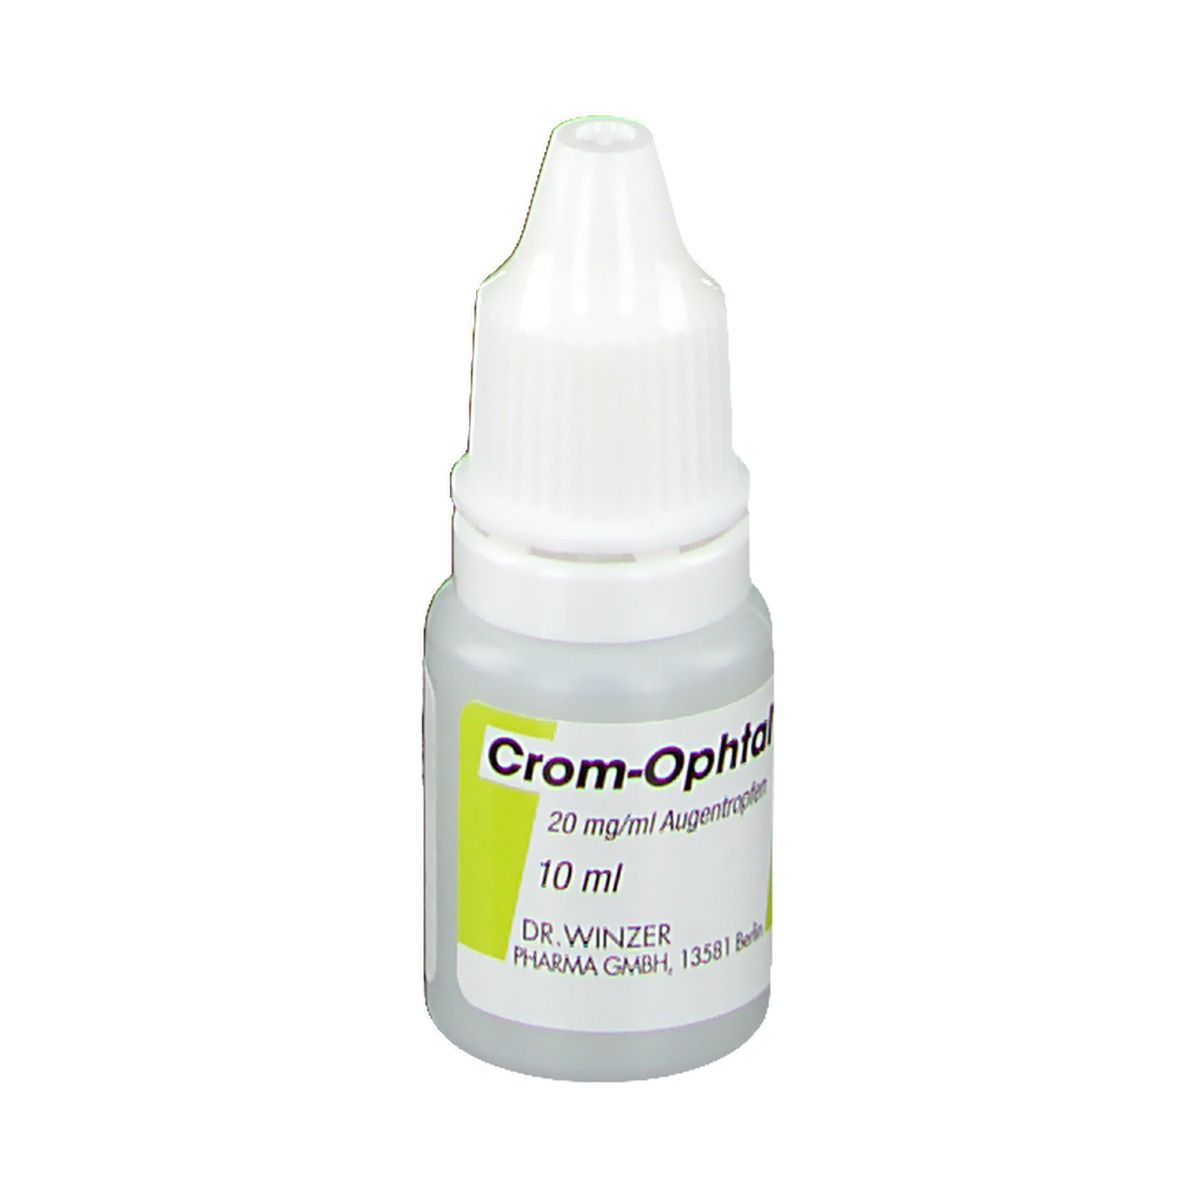 Crom-Ophtal®